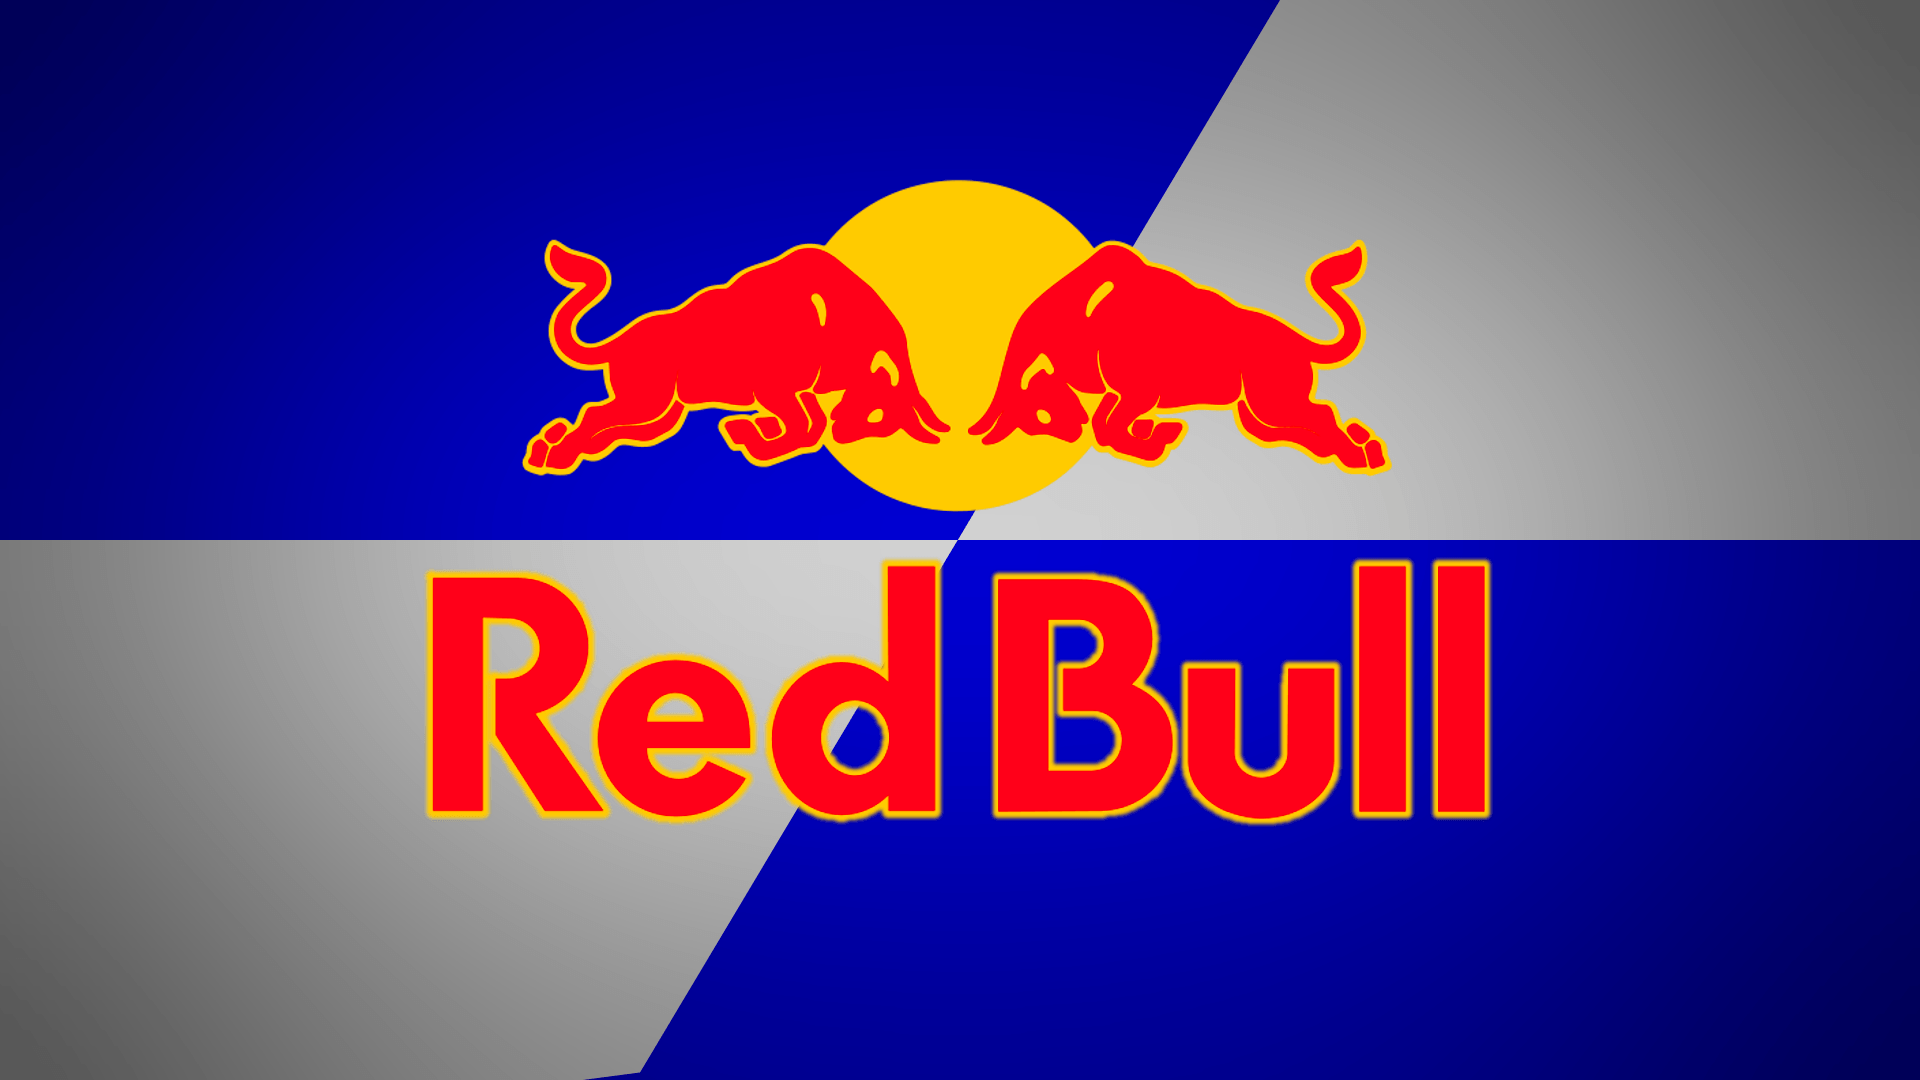 Red Bull Wallpaper HD › Findorget